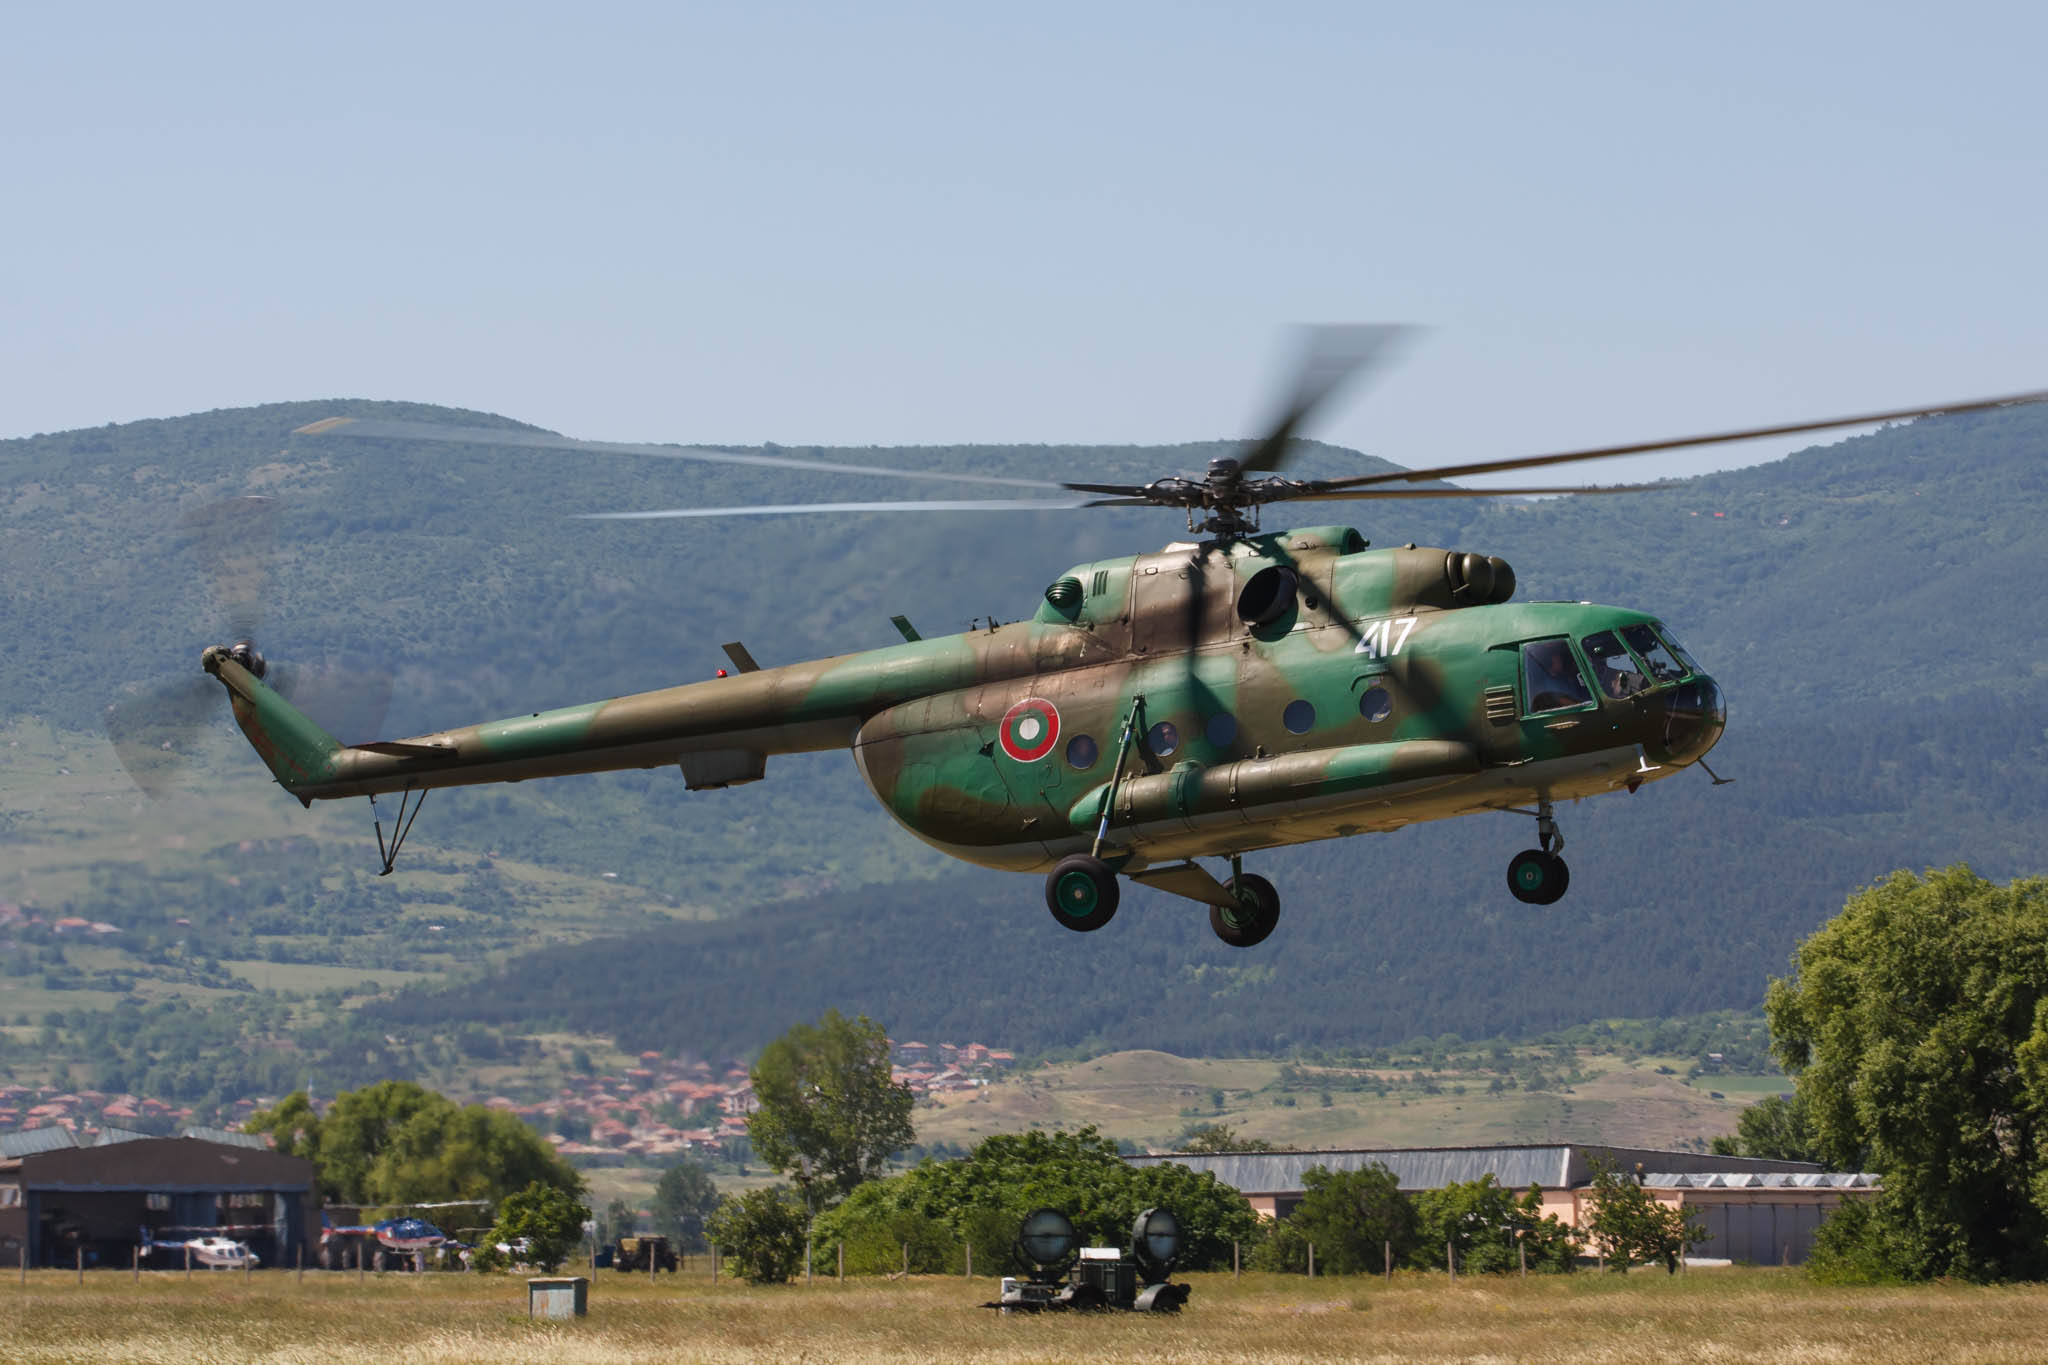 QinetiQ's Russian Built Helicopters